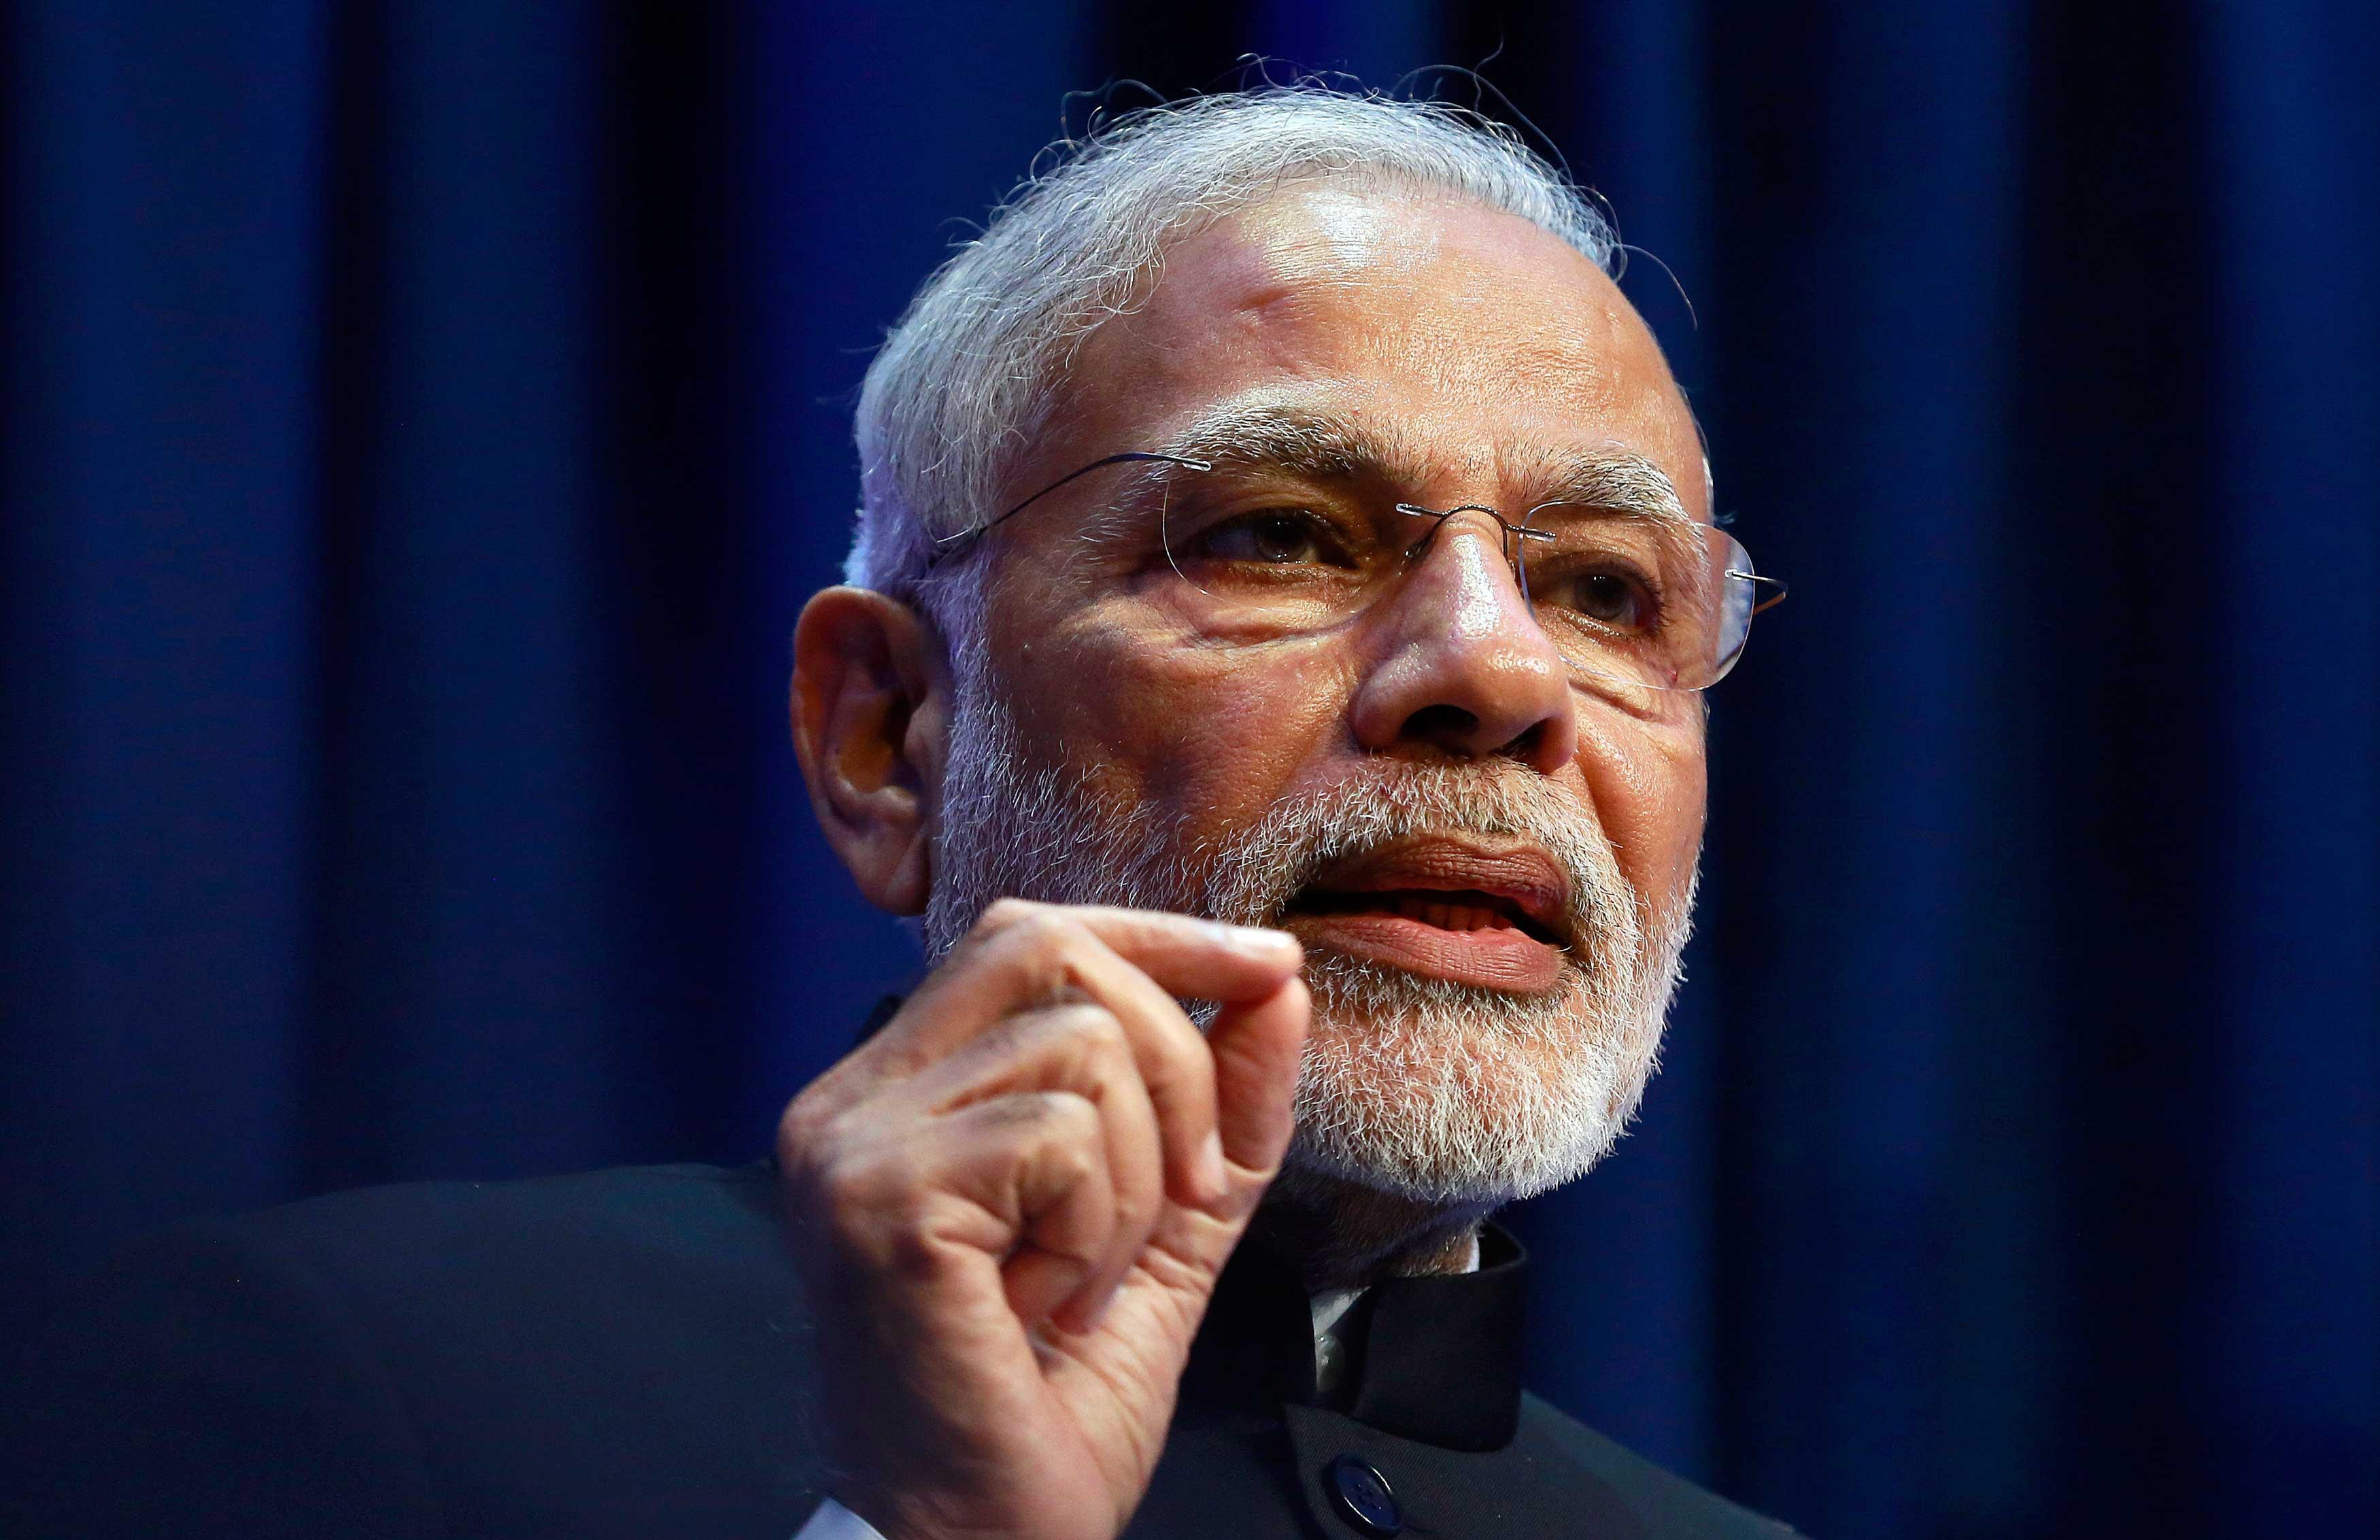 Governance reform is top priority: Modi to top CEOs